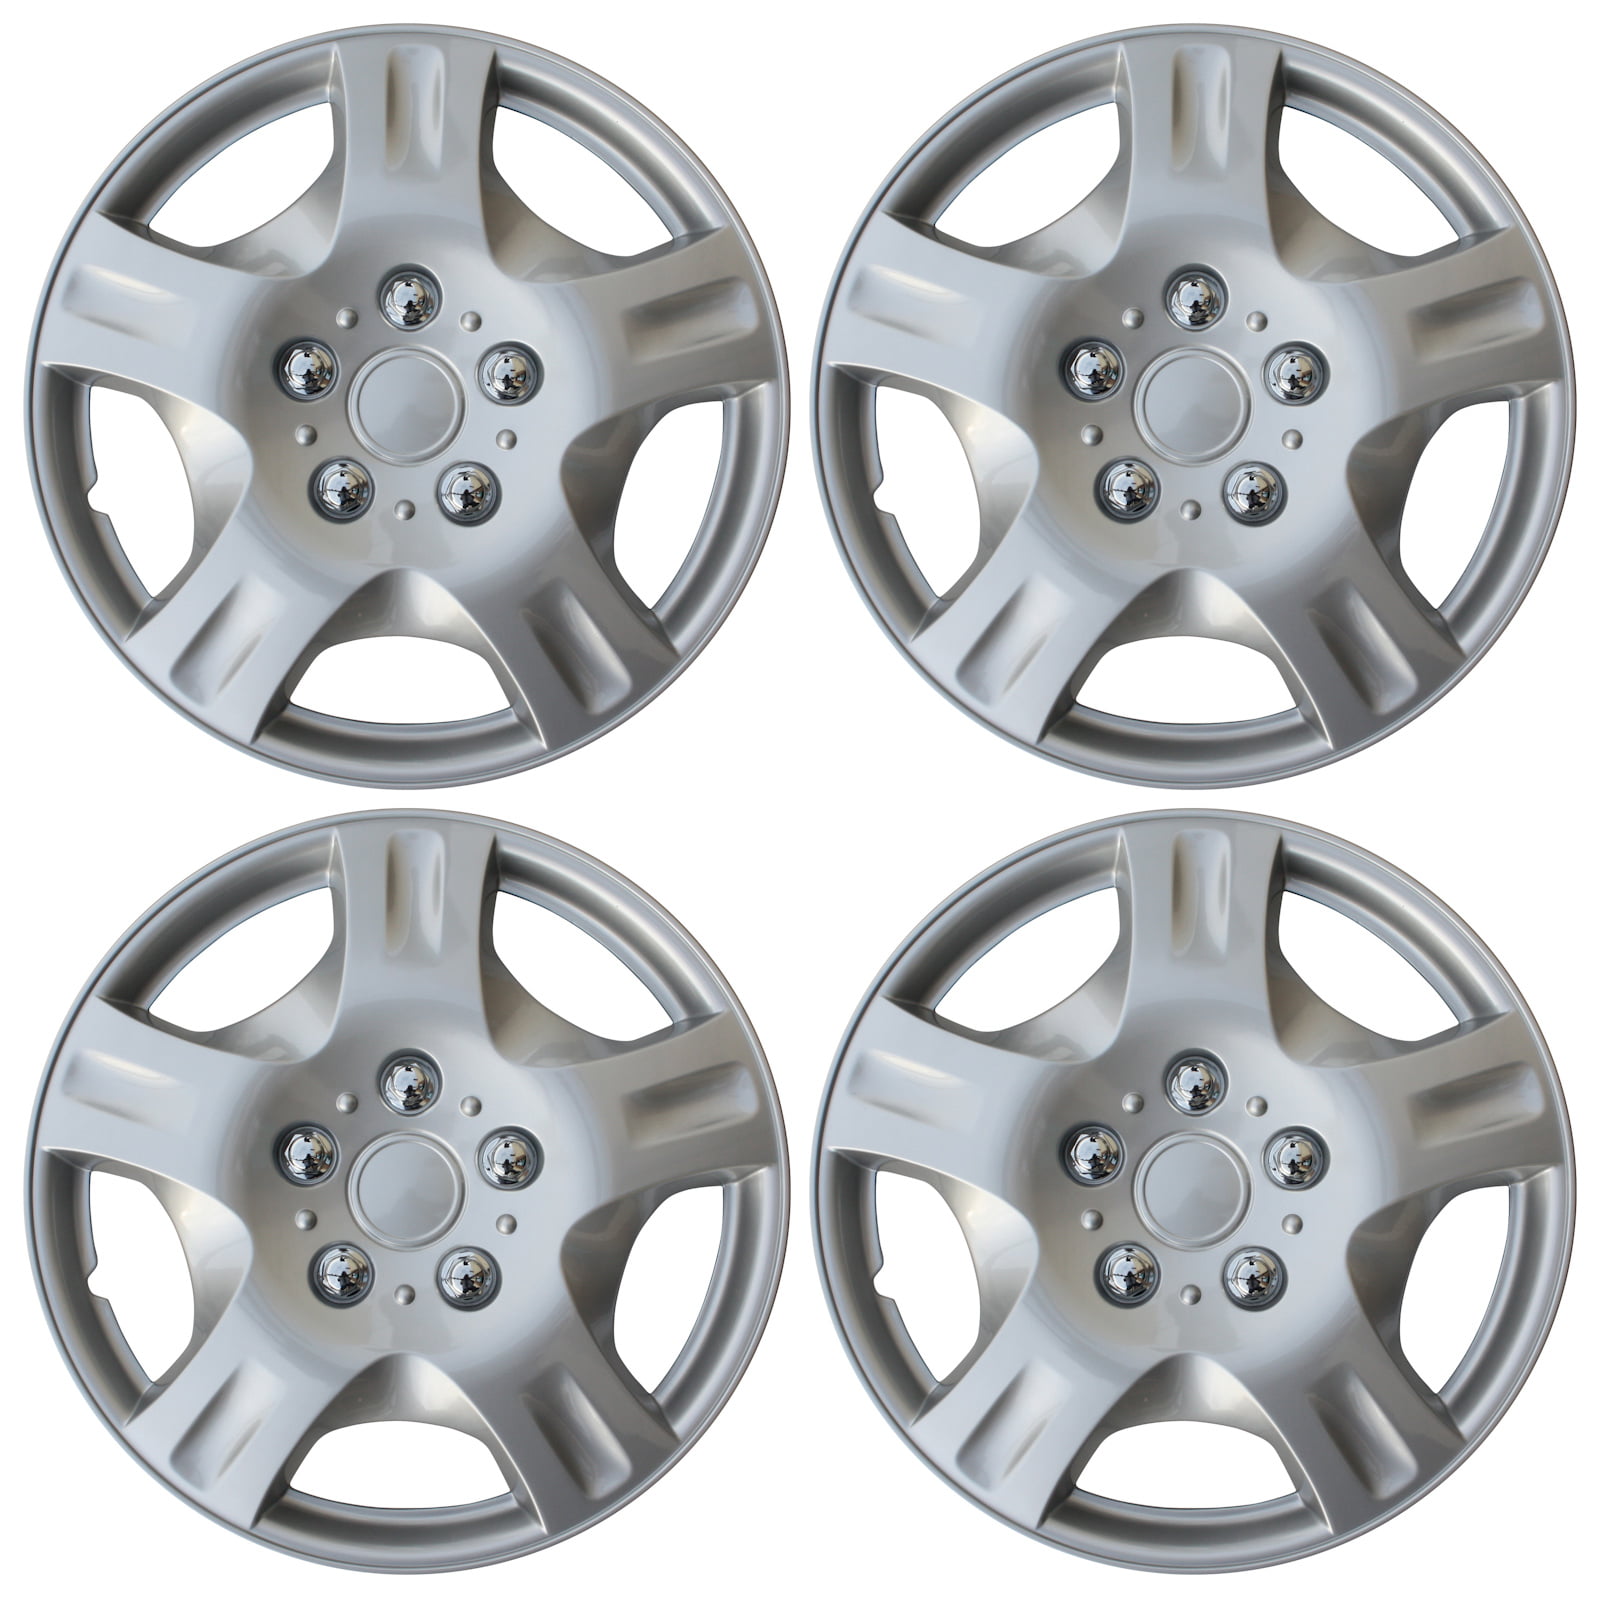 4 NEW OEM SILVER 17" HUB CAPS FITS NISSAN SUV CAR ABS CENTER WHEEL COVERS SET